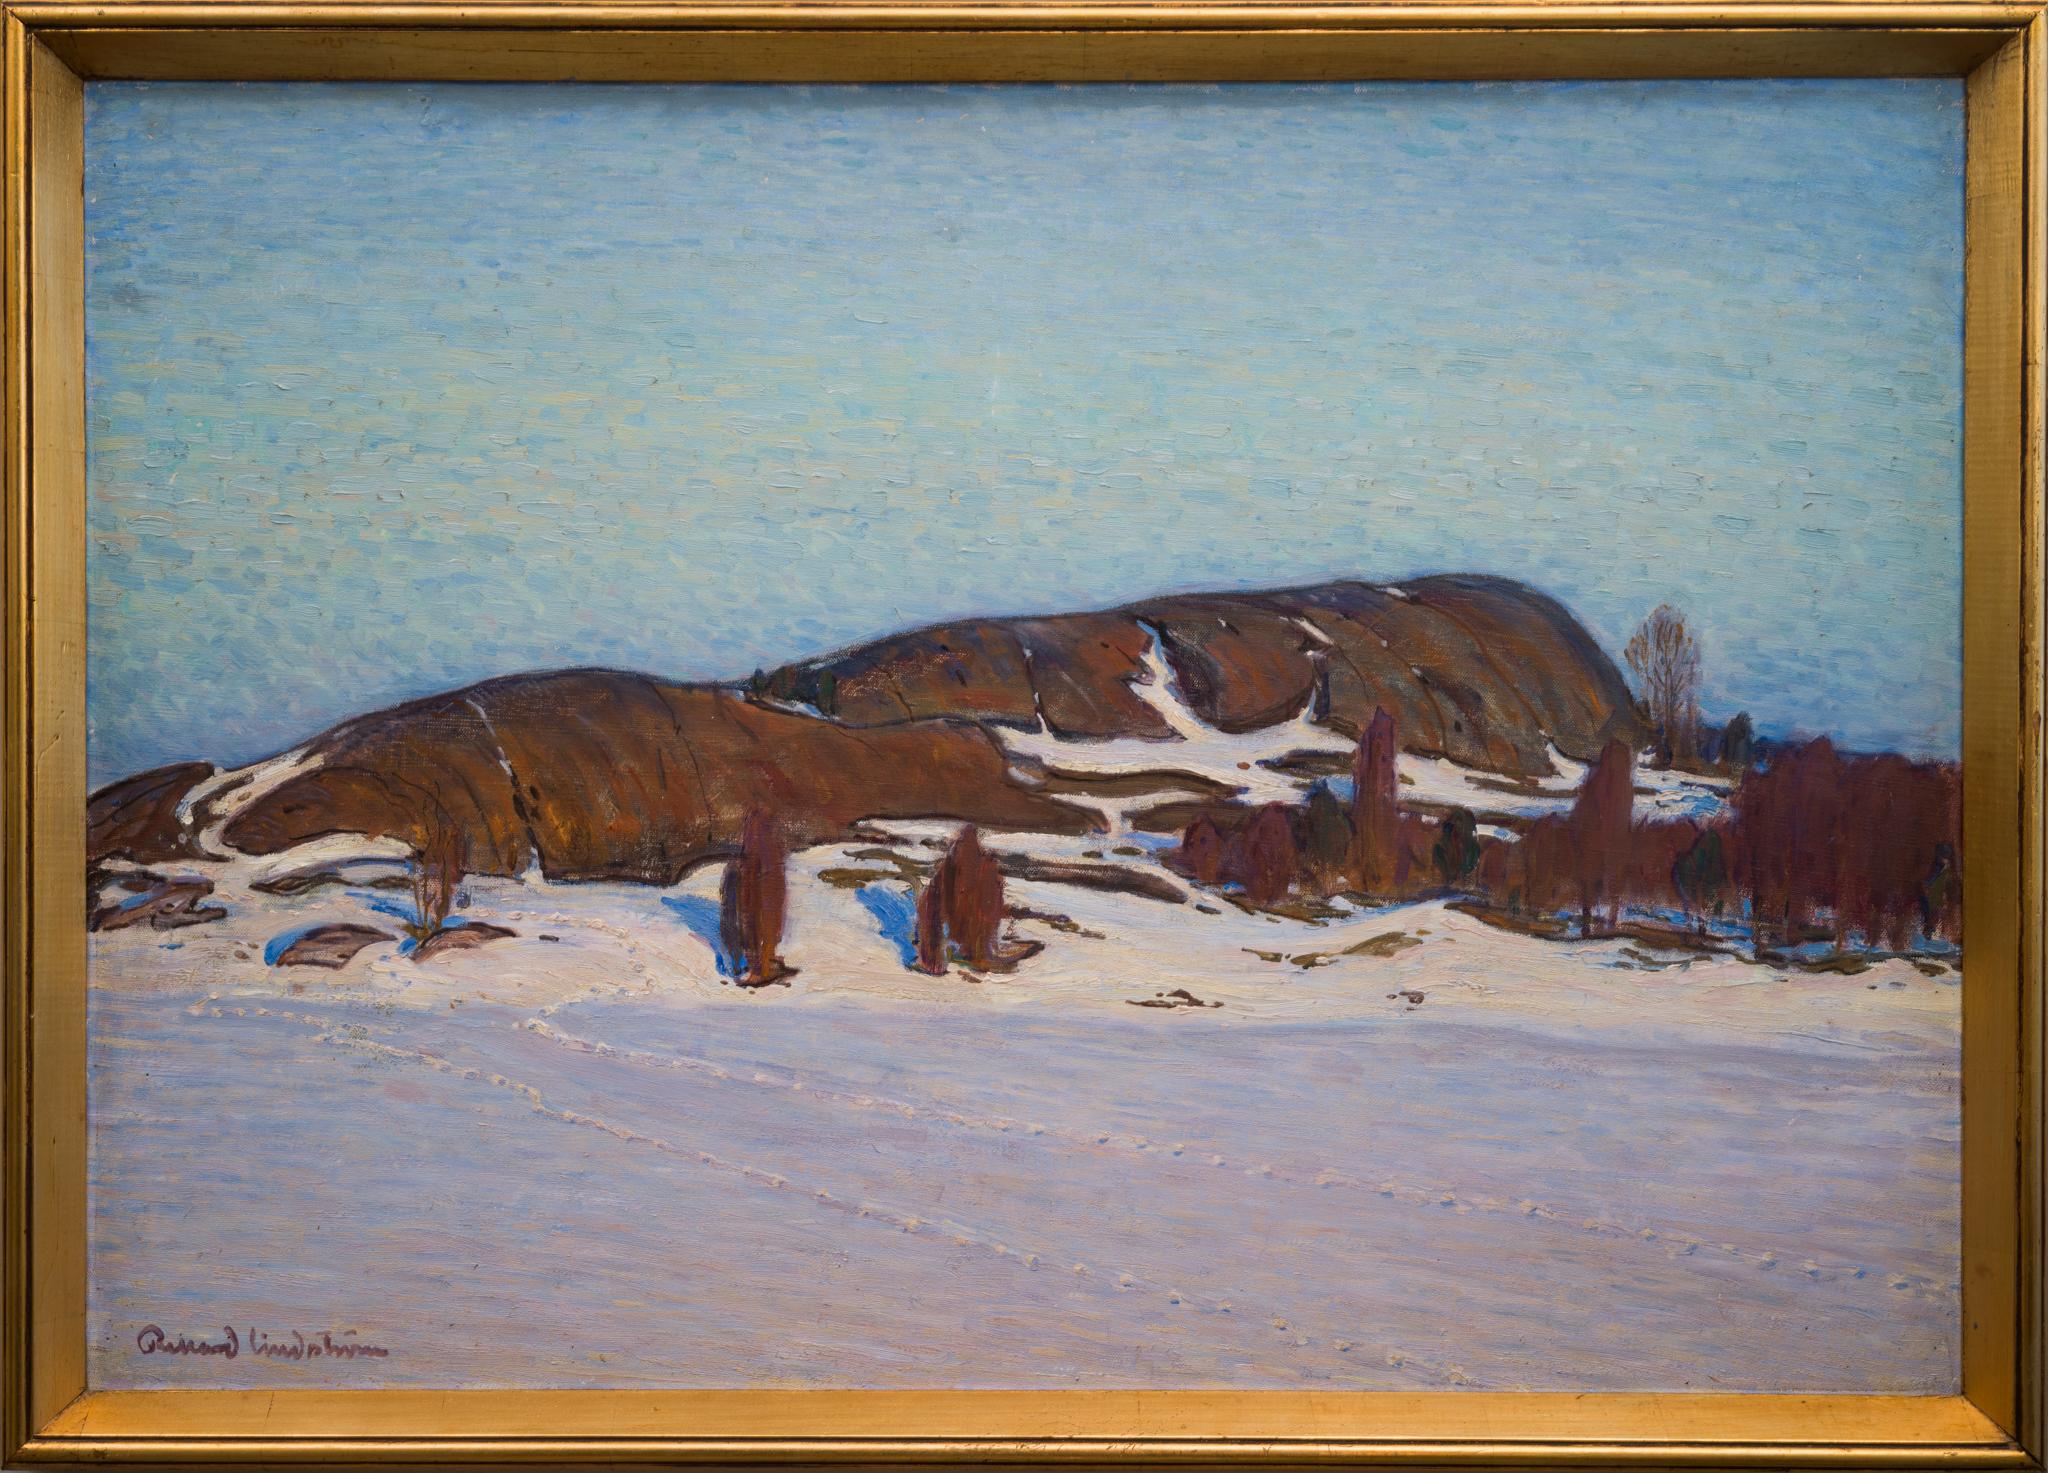 Depicting a winter wonderland, this piece mesmerizes the viewer with its turquoise sky - a bold and unique choice that draws the eyes upwards. But the narrative is more profound. Set against this sky is a distant, rugged stone hill, standing as a